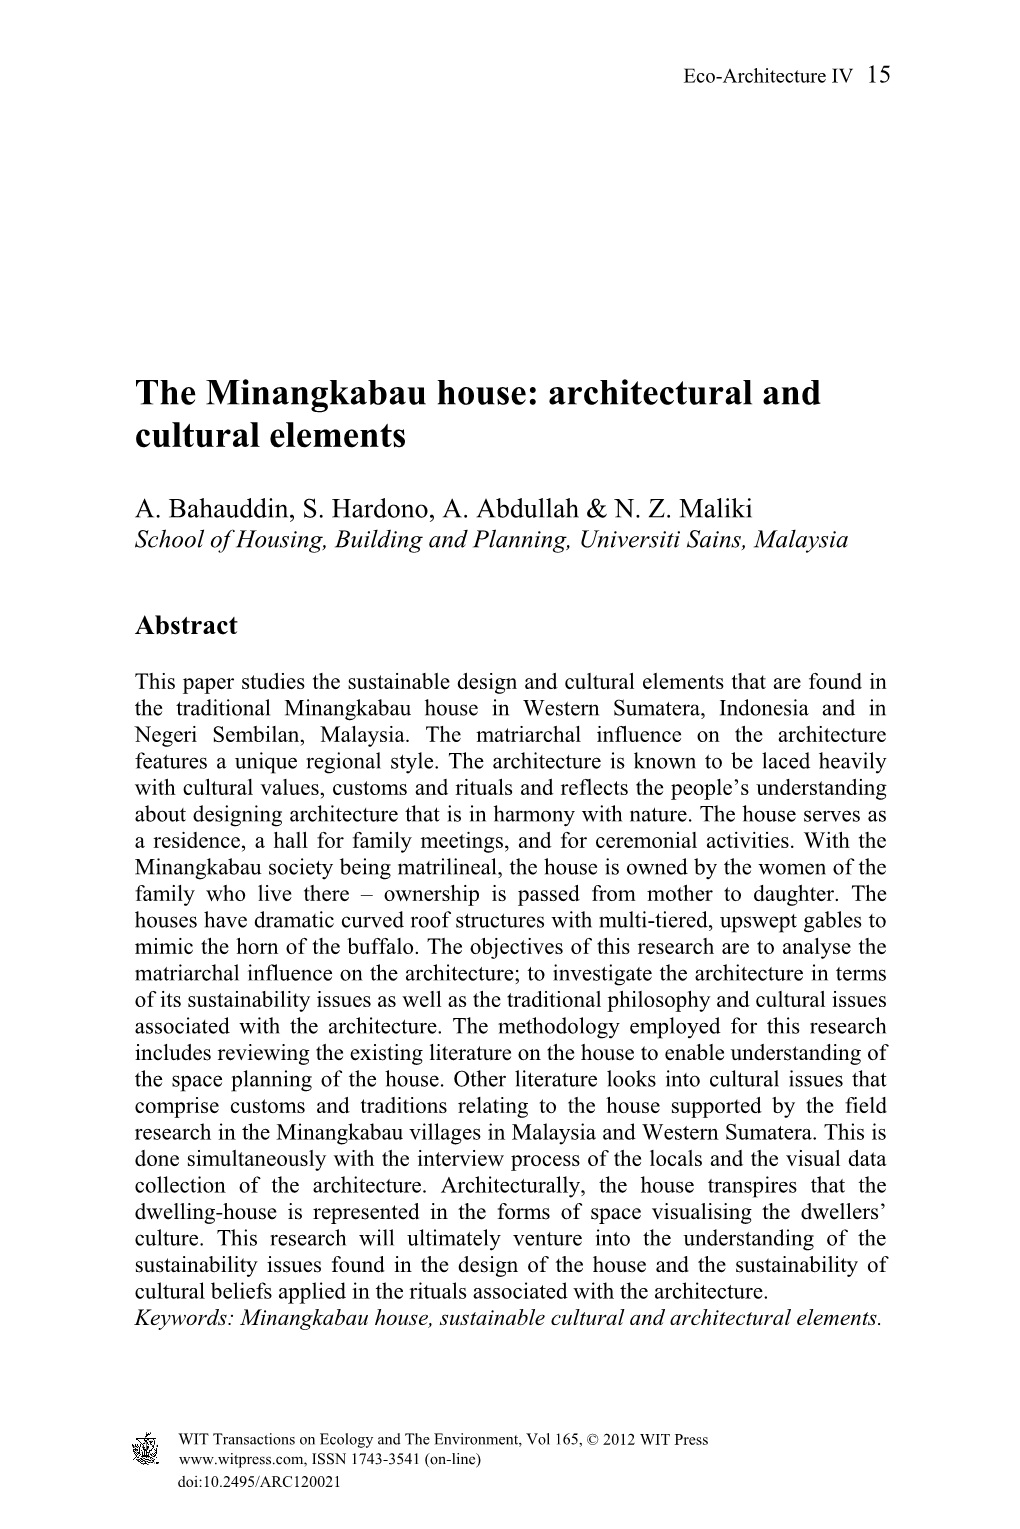 The Minangkabau House: Architectural and Cultural Elements